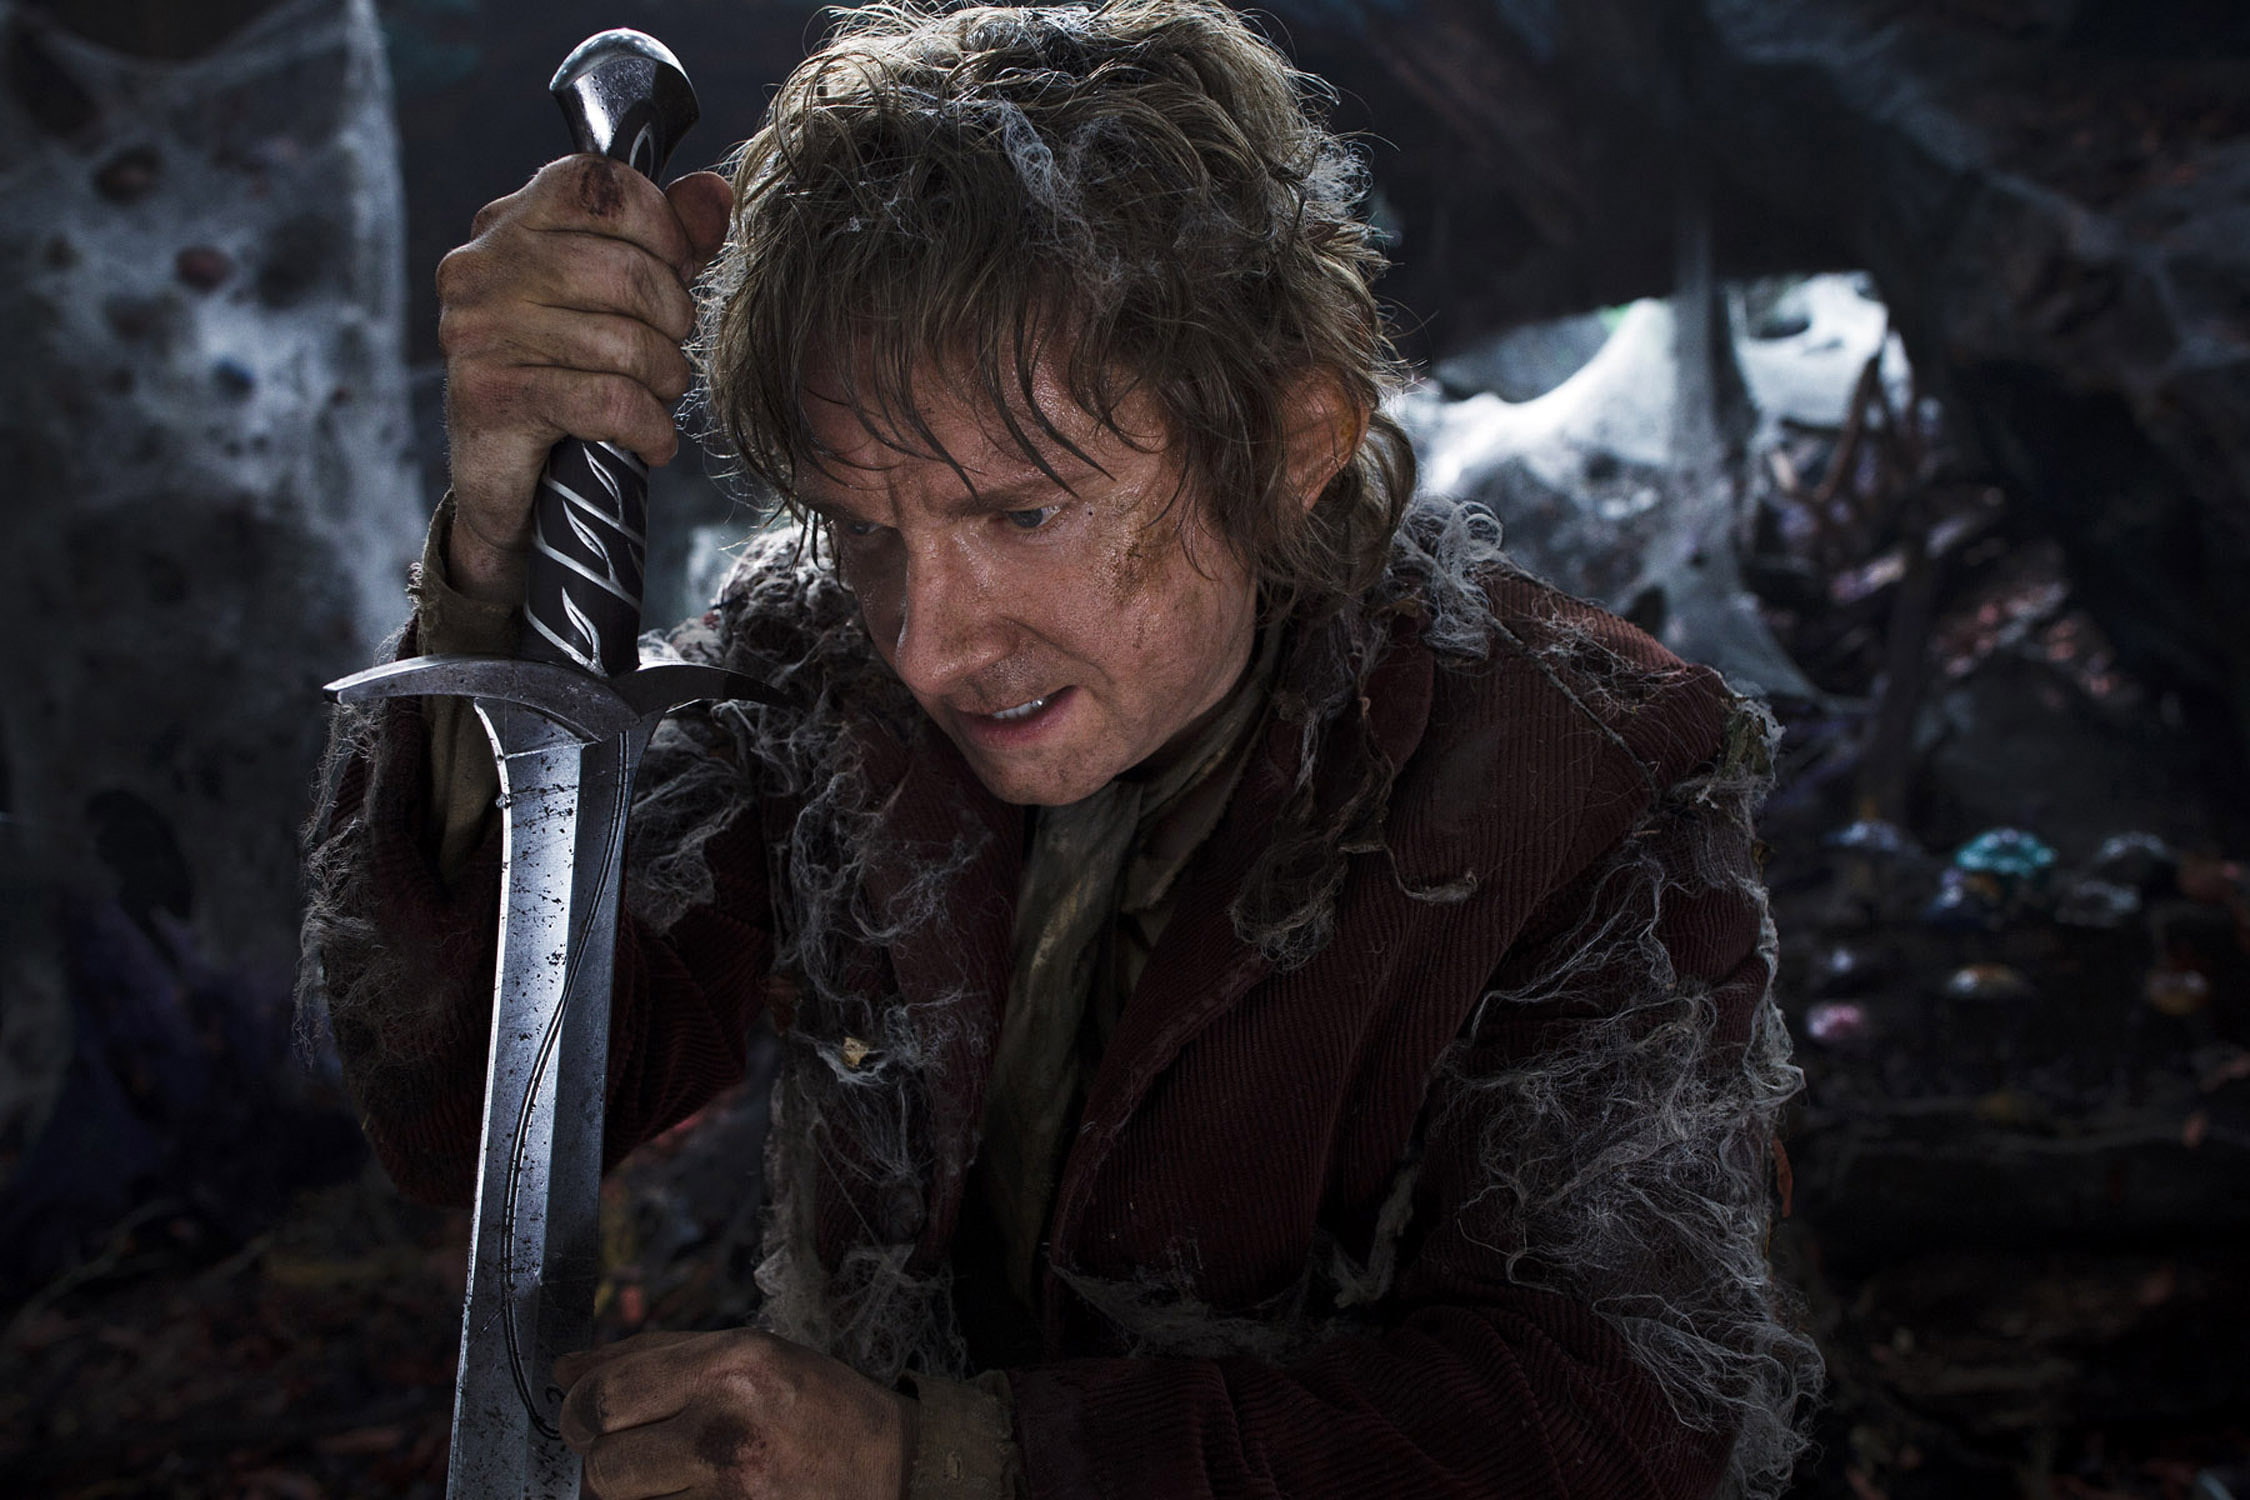 weapons, the film, sword, The Lord of the rings, Baggins, The hobbit